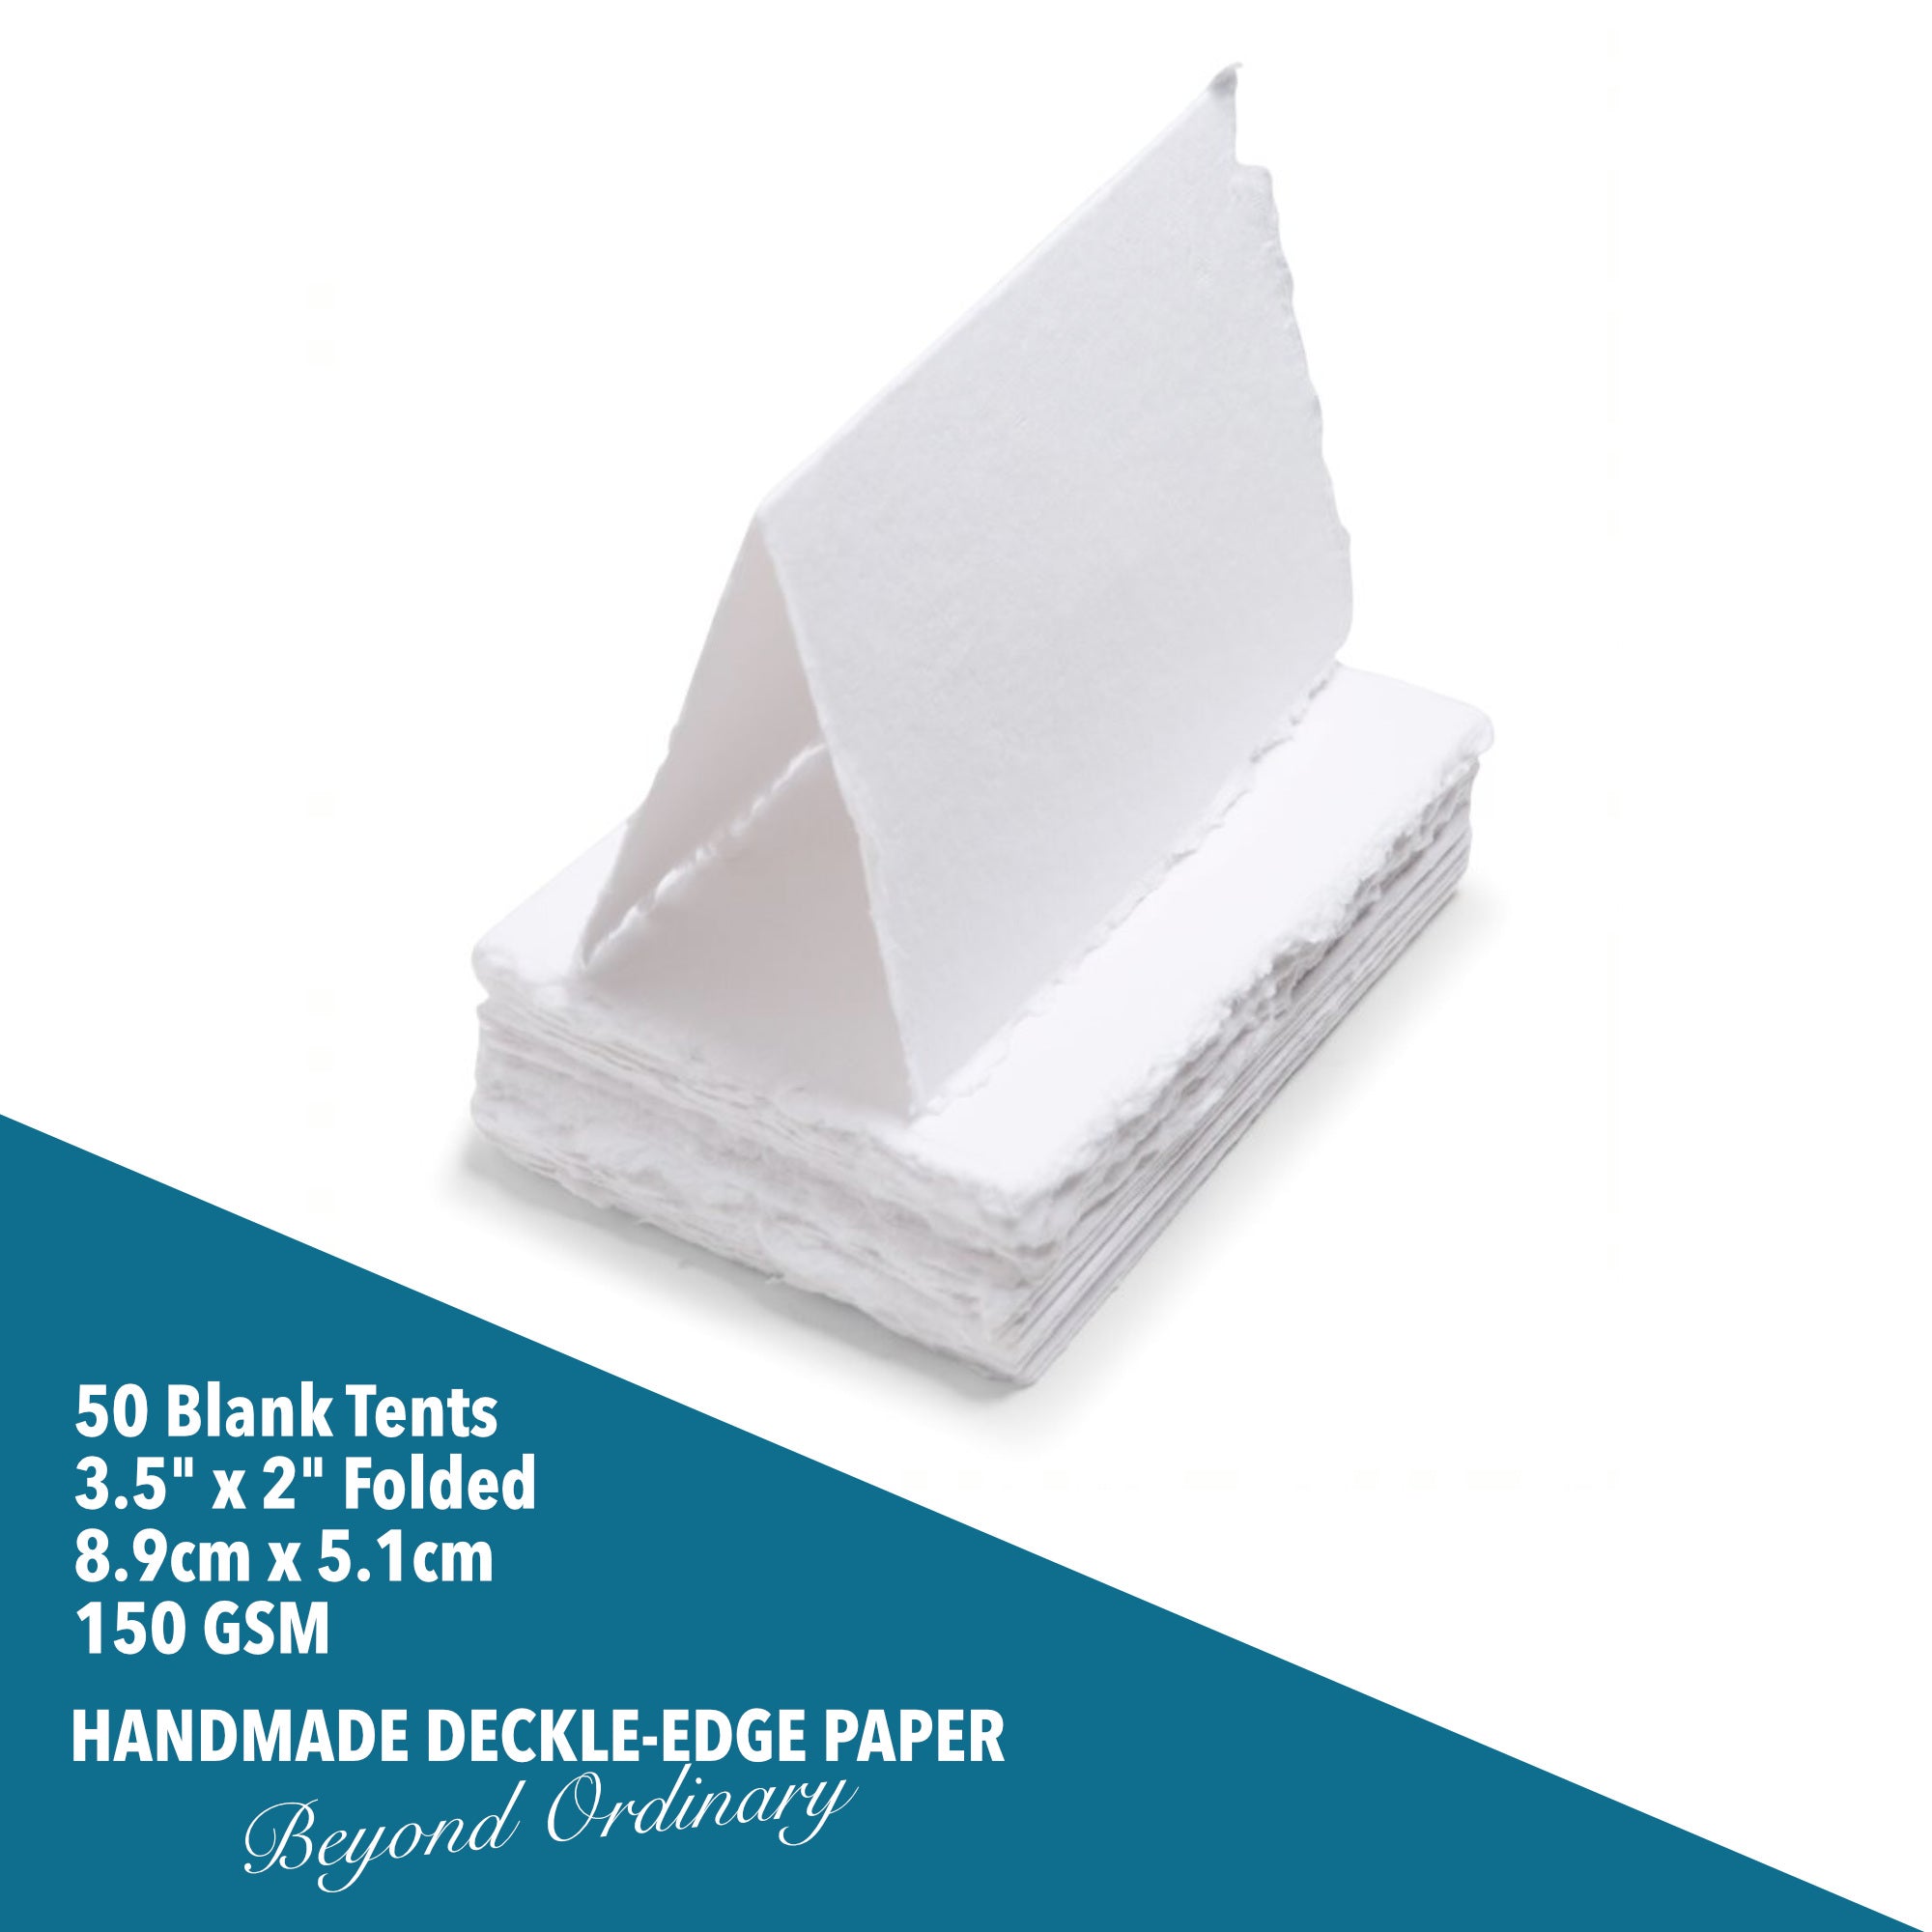 8.5 x 11 White Handmade Paper With Deckle Edge (No Seeds)